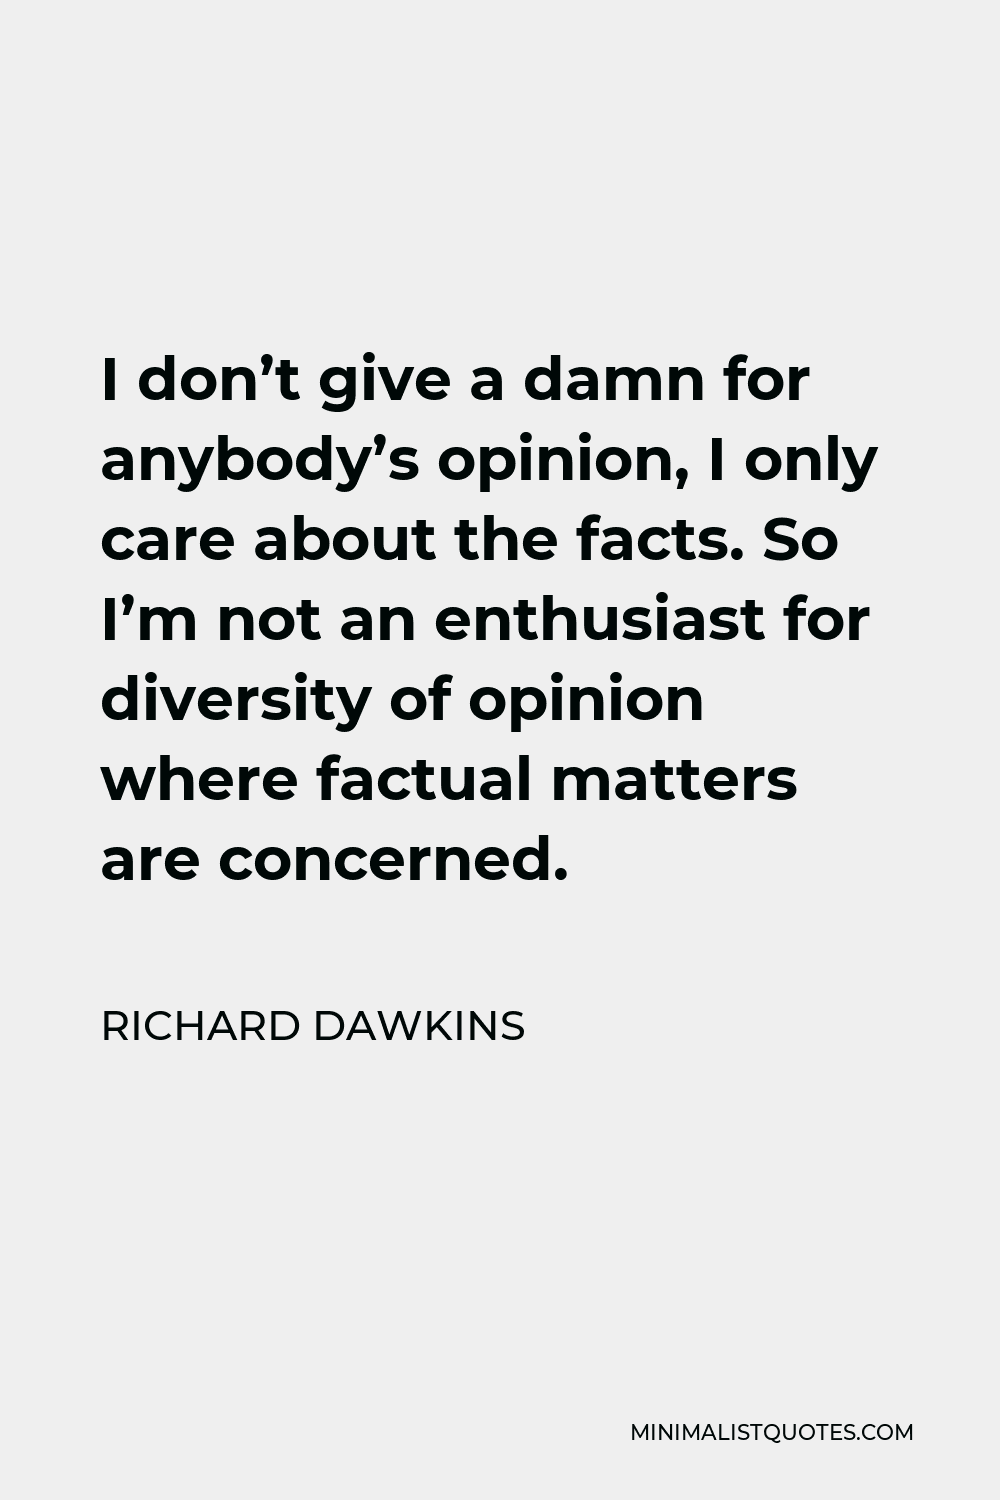 Richard Dawkins Quote - I don’t give a damn for anybody’s opinion, I only care about the facts. So I’m not an enthusiast for diversity of opinion where factual matters are concerned.